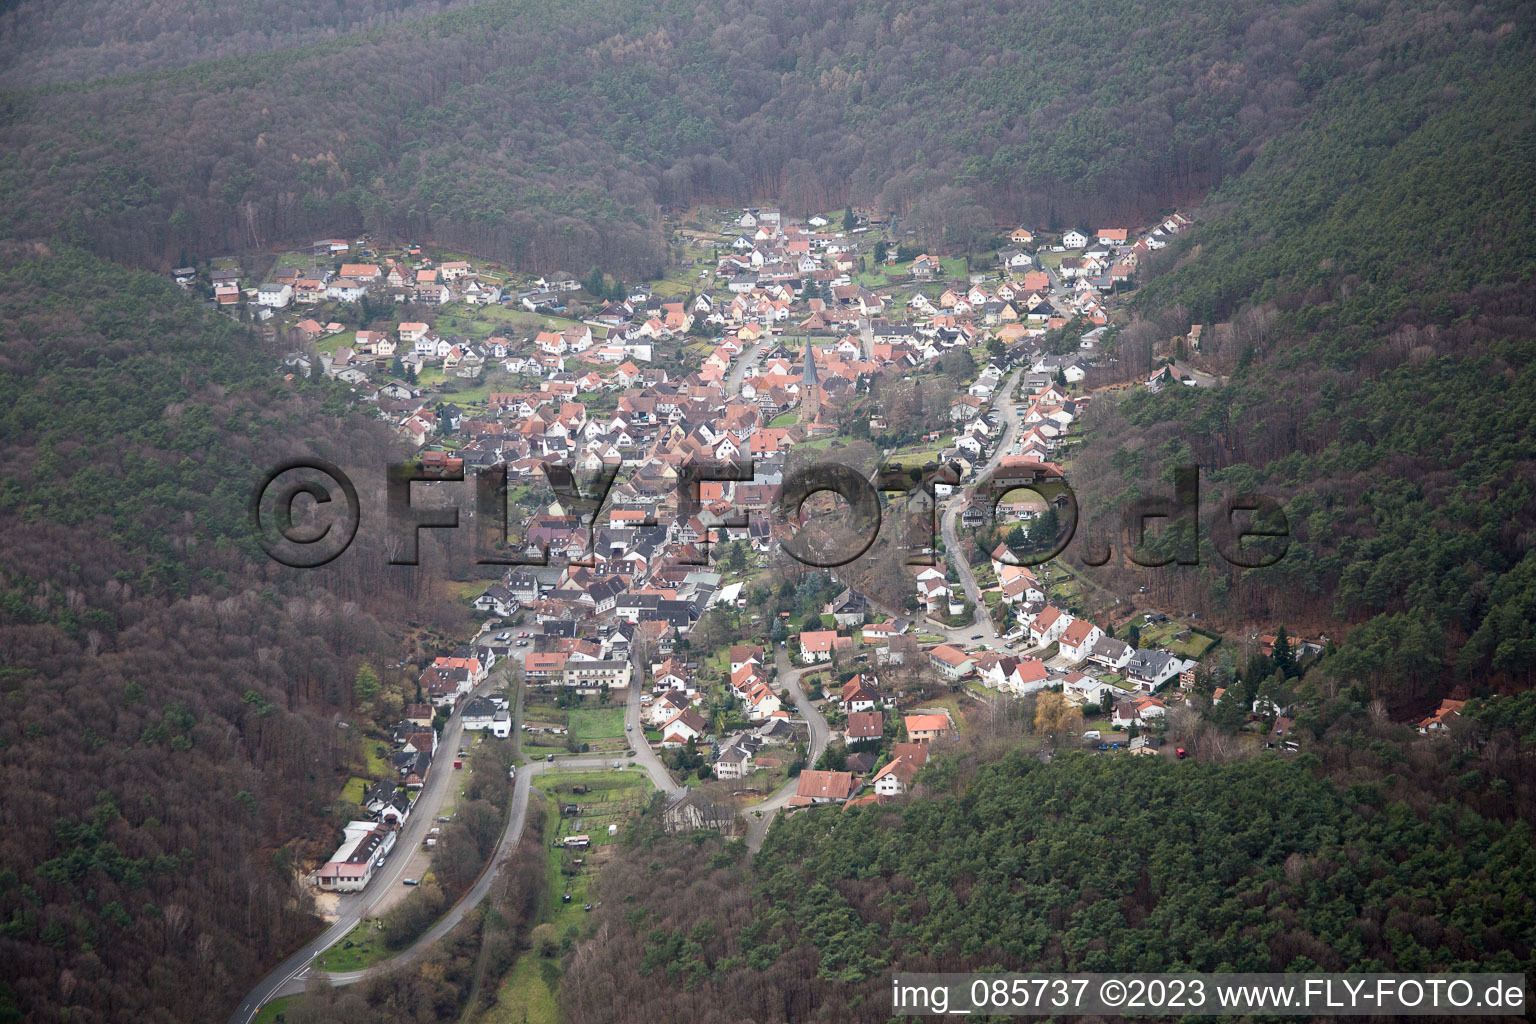 Dörrenbach in the state Rhineland-Palatinate, Germany seen from a drone